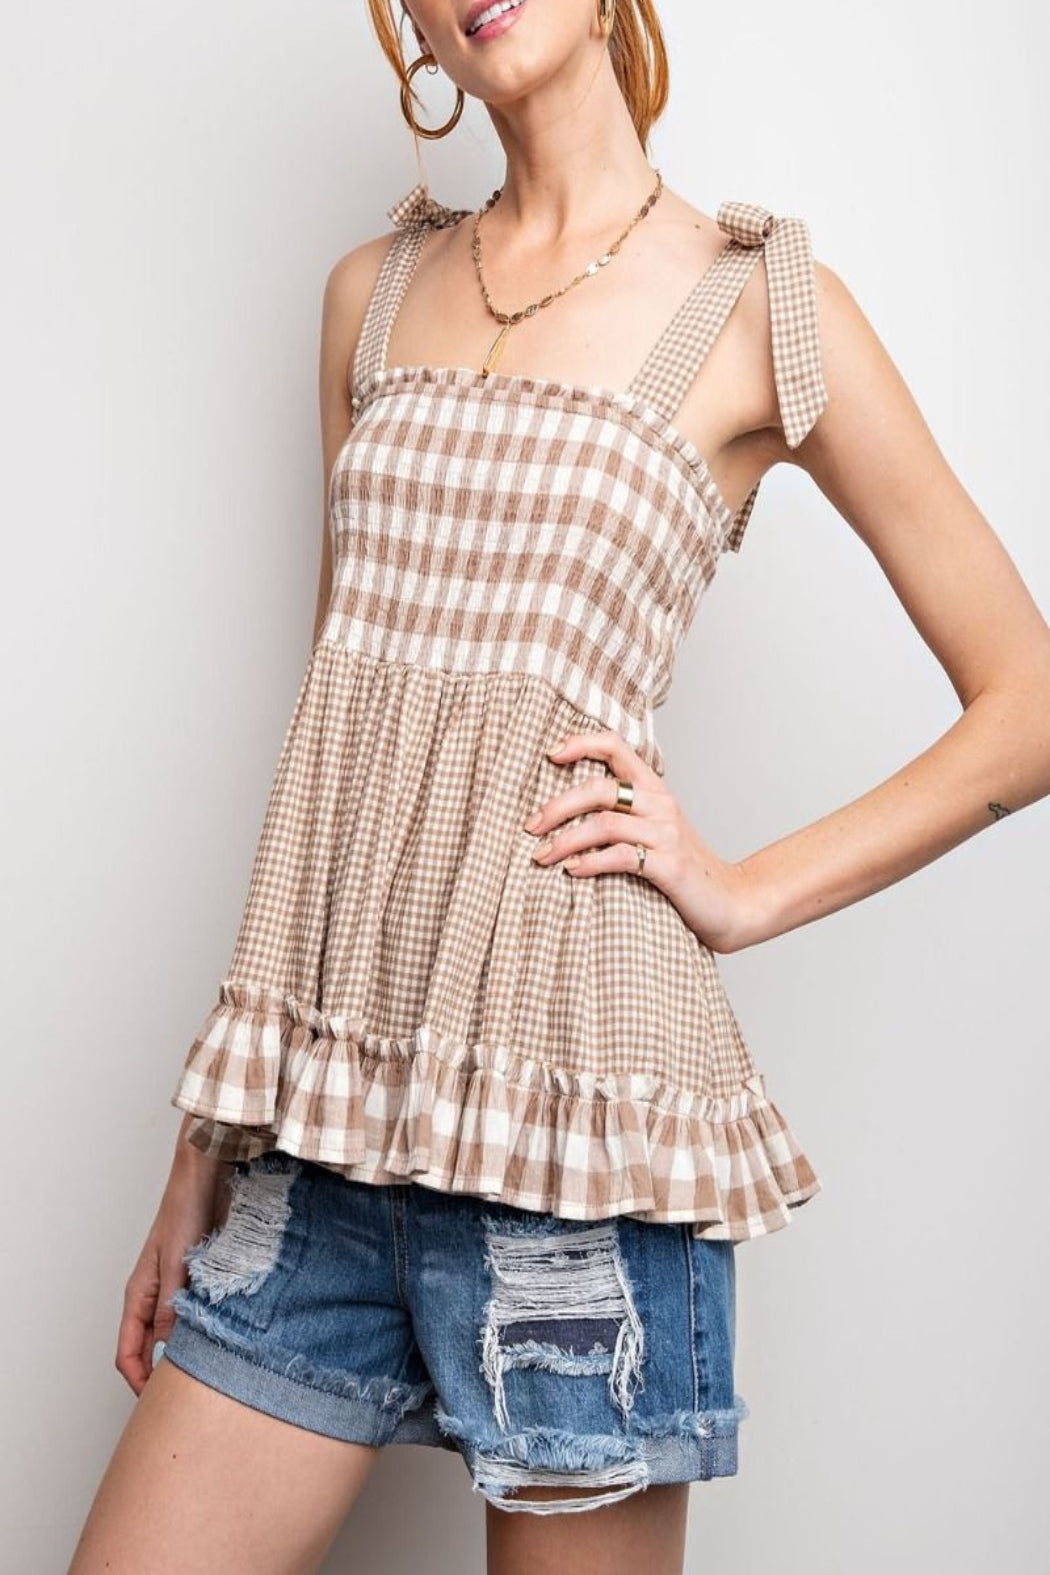 All The Good Times Gingham Print Top